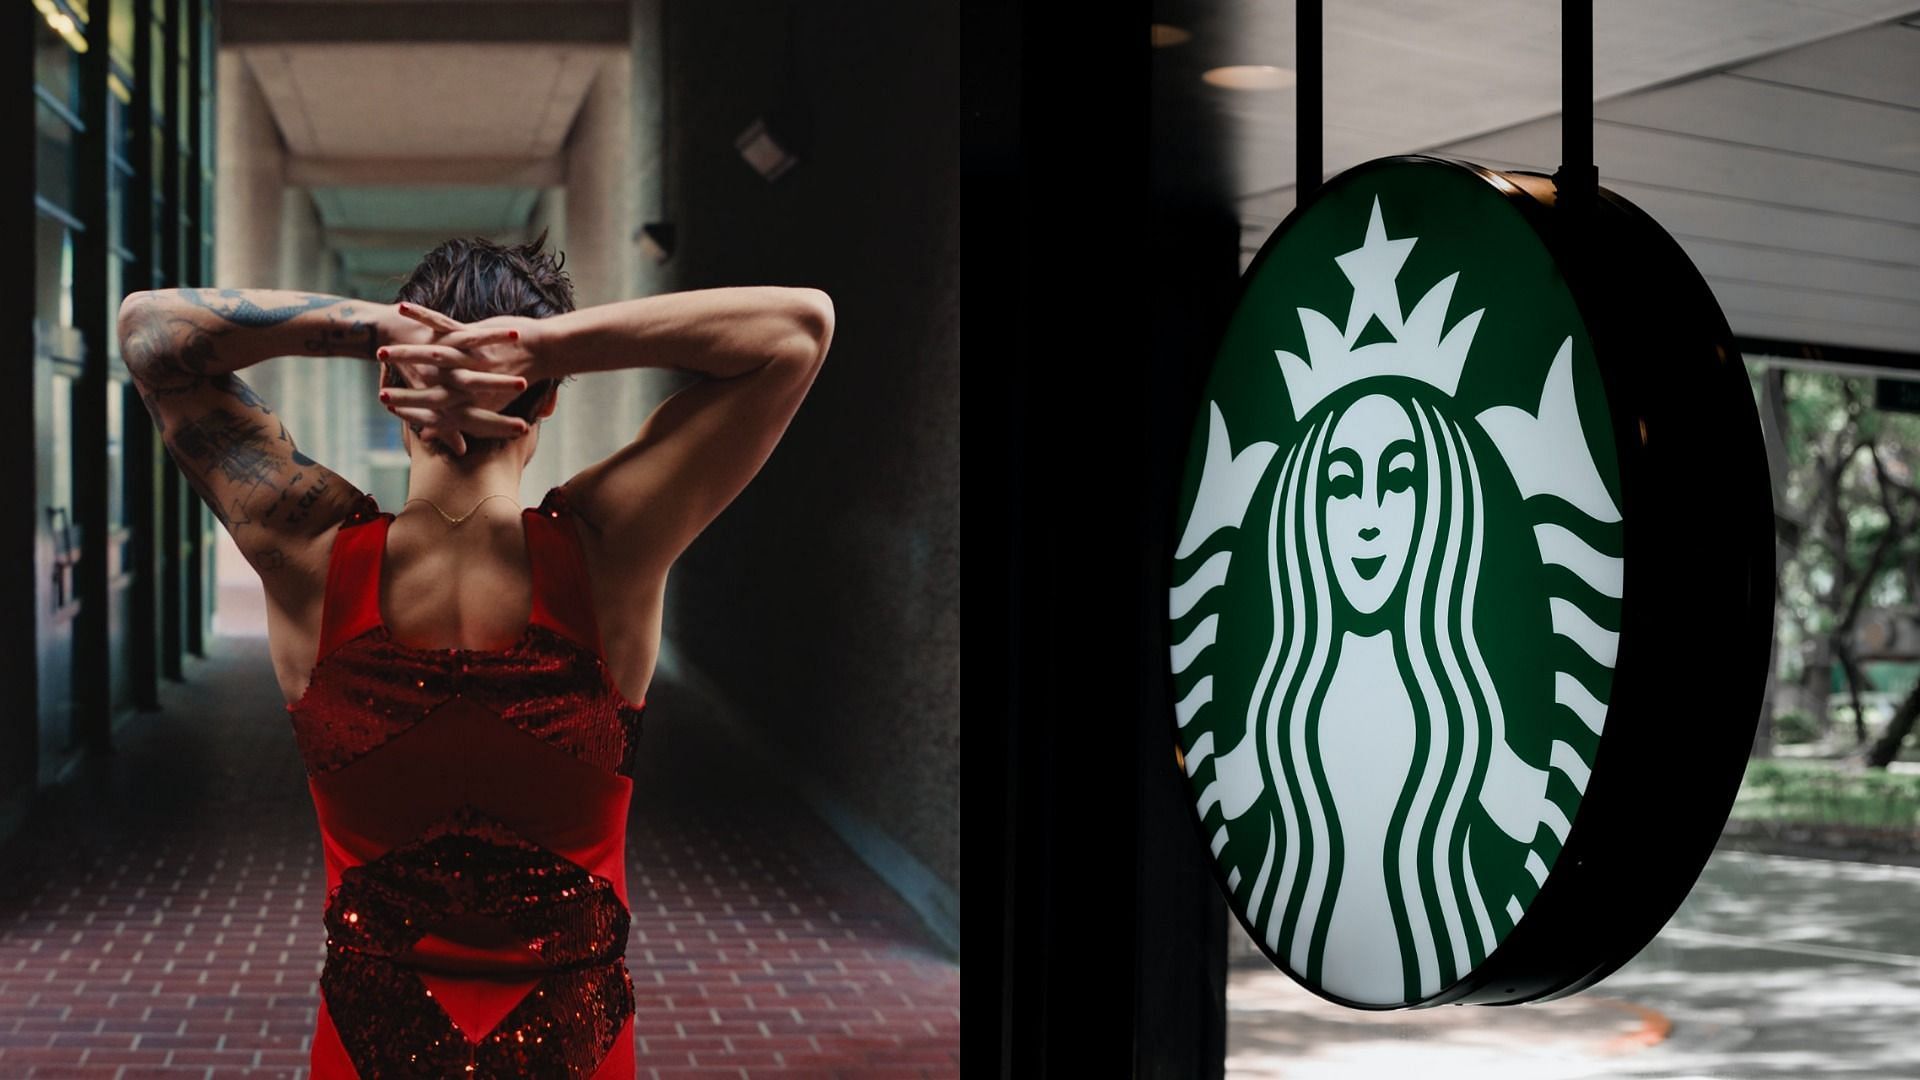 Rumors of a Harry Styles and Starbucks collaboration go viral on Twitter (Images via Harry Styles and Henry &amp; Co/Unsplash)